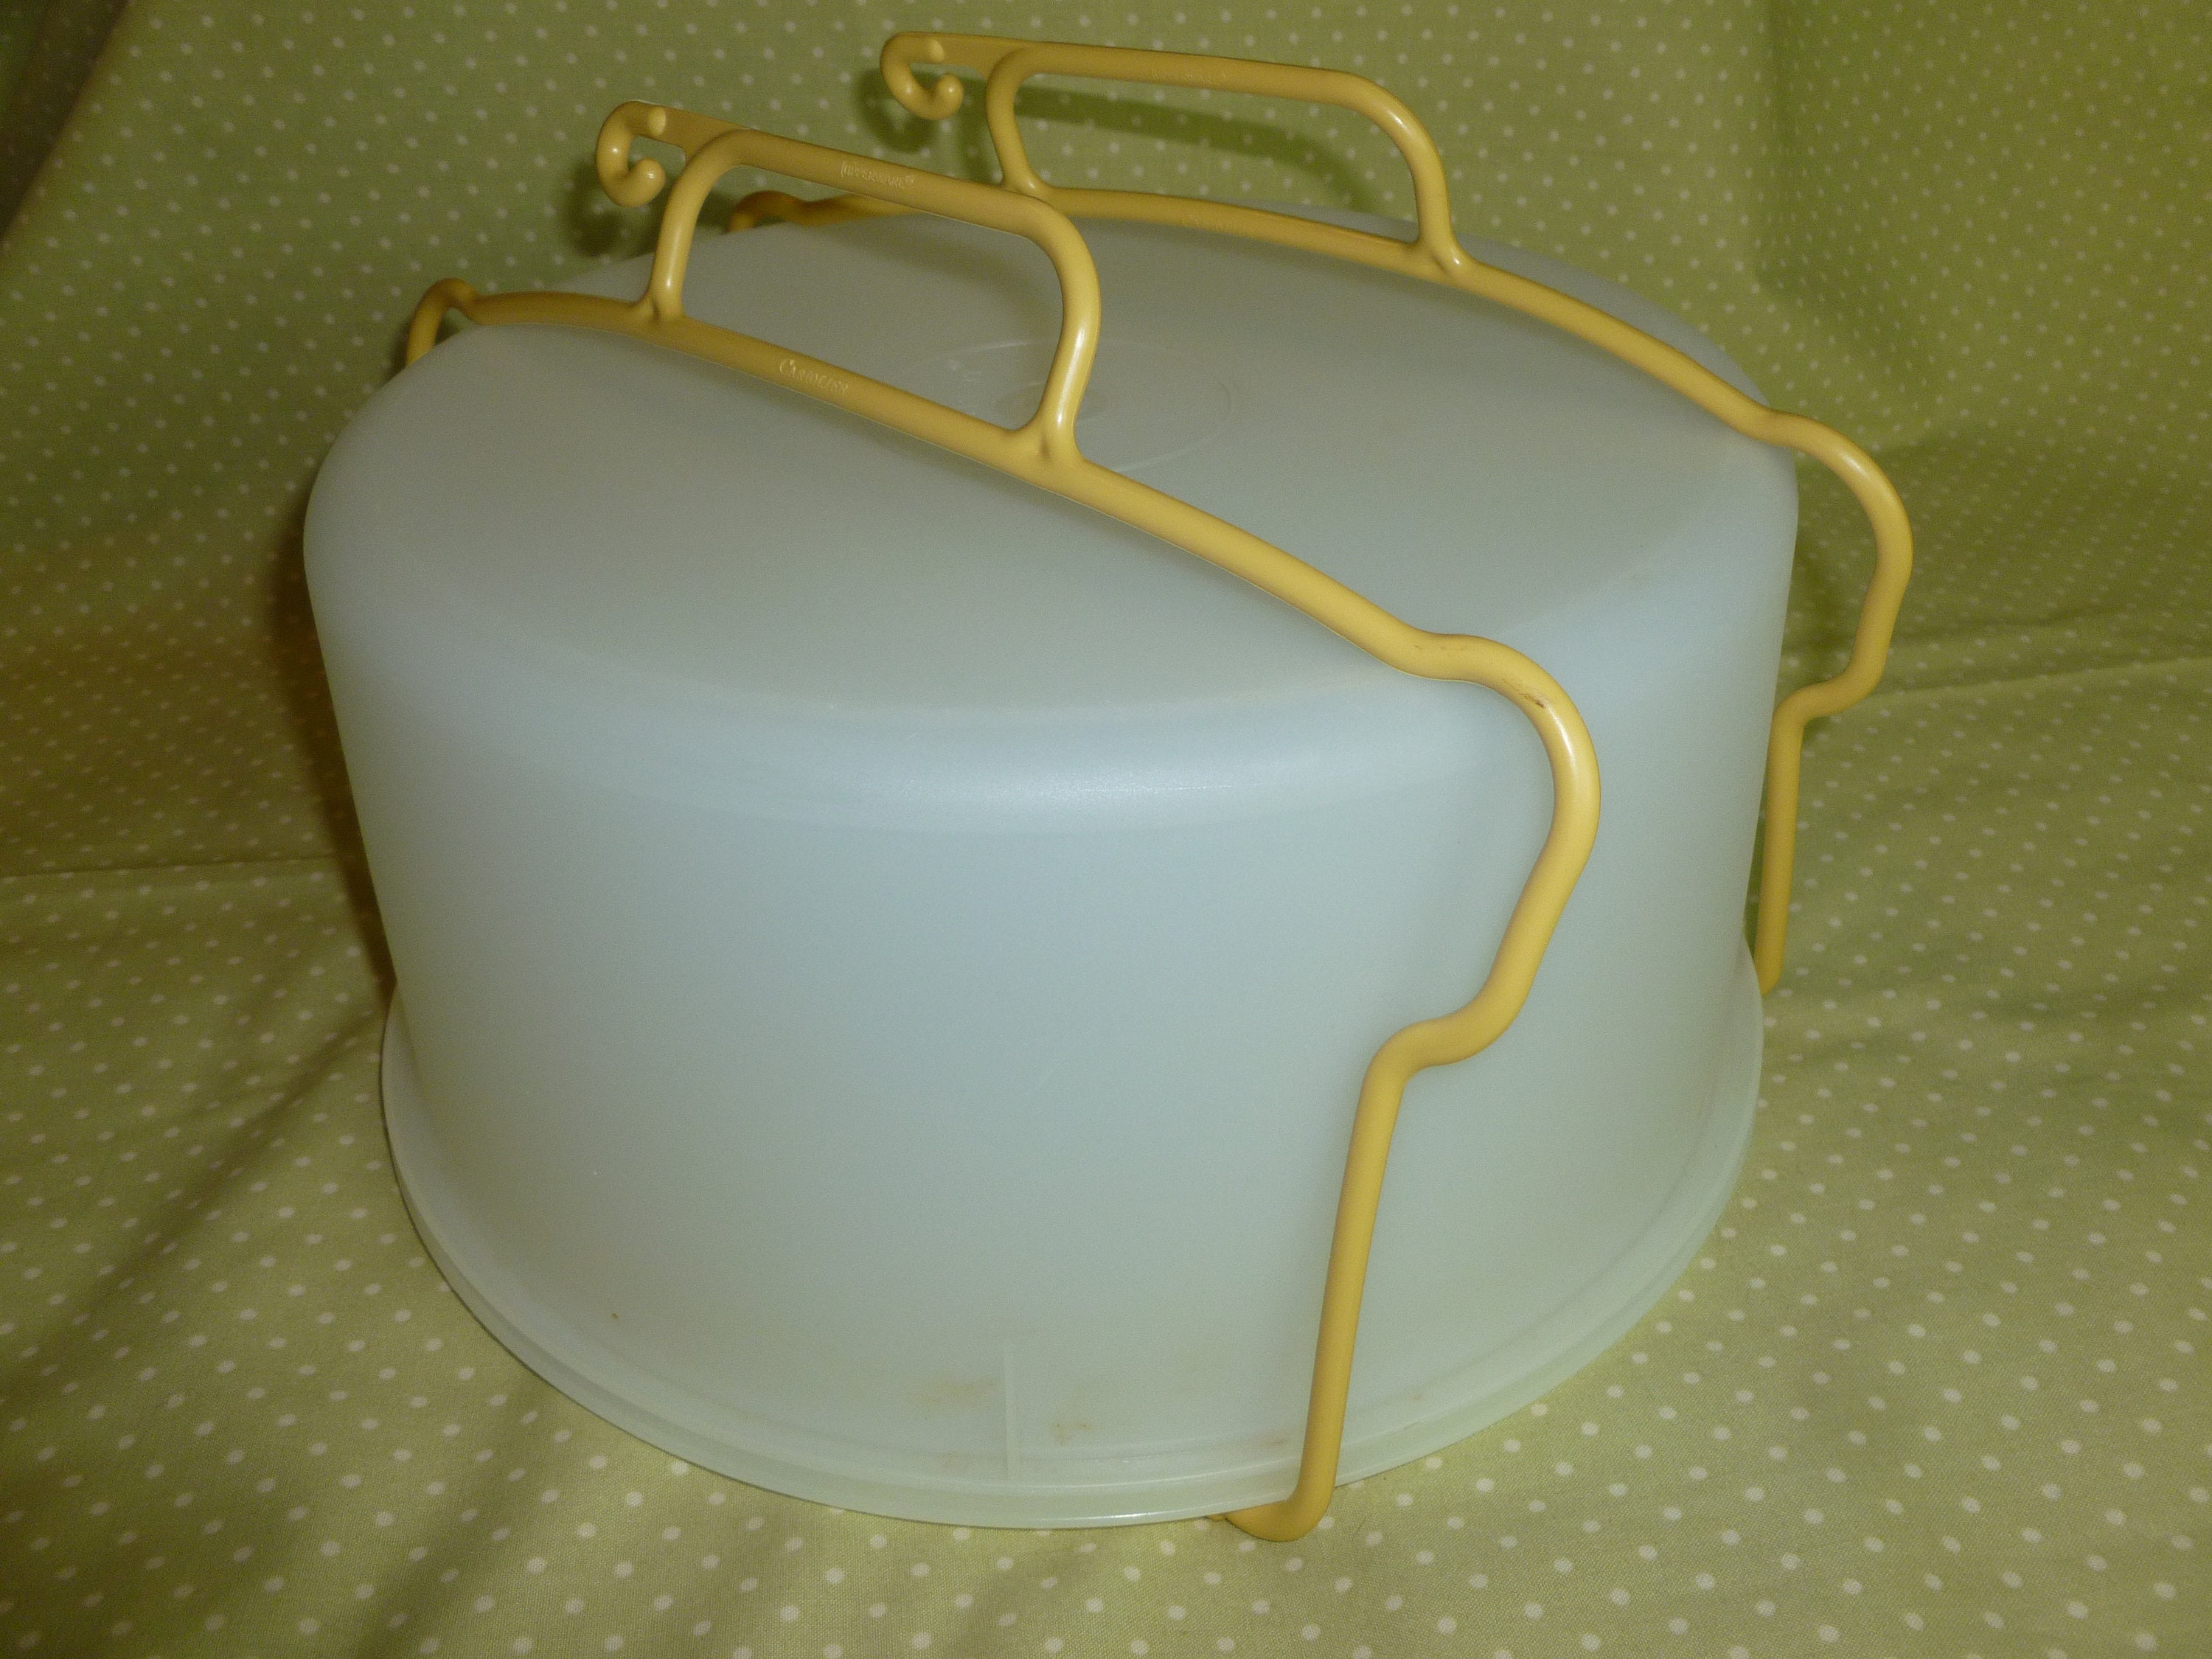 TUPPERWARE HUGE ROUND CAKE TAKER w/Handle - At Home or On-the-GO - NEW COLOR